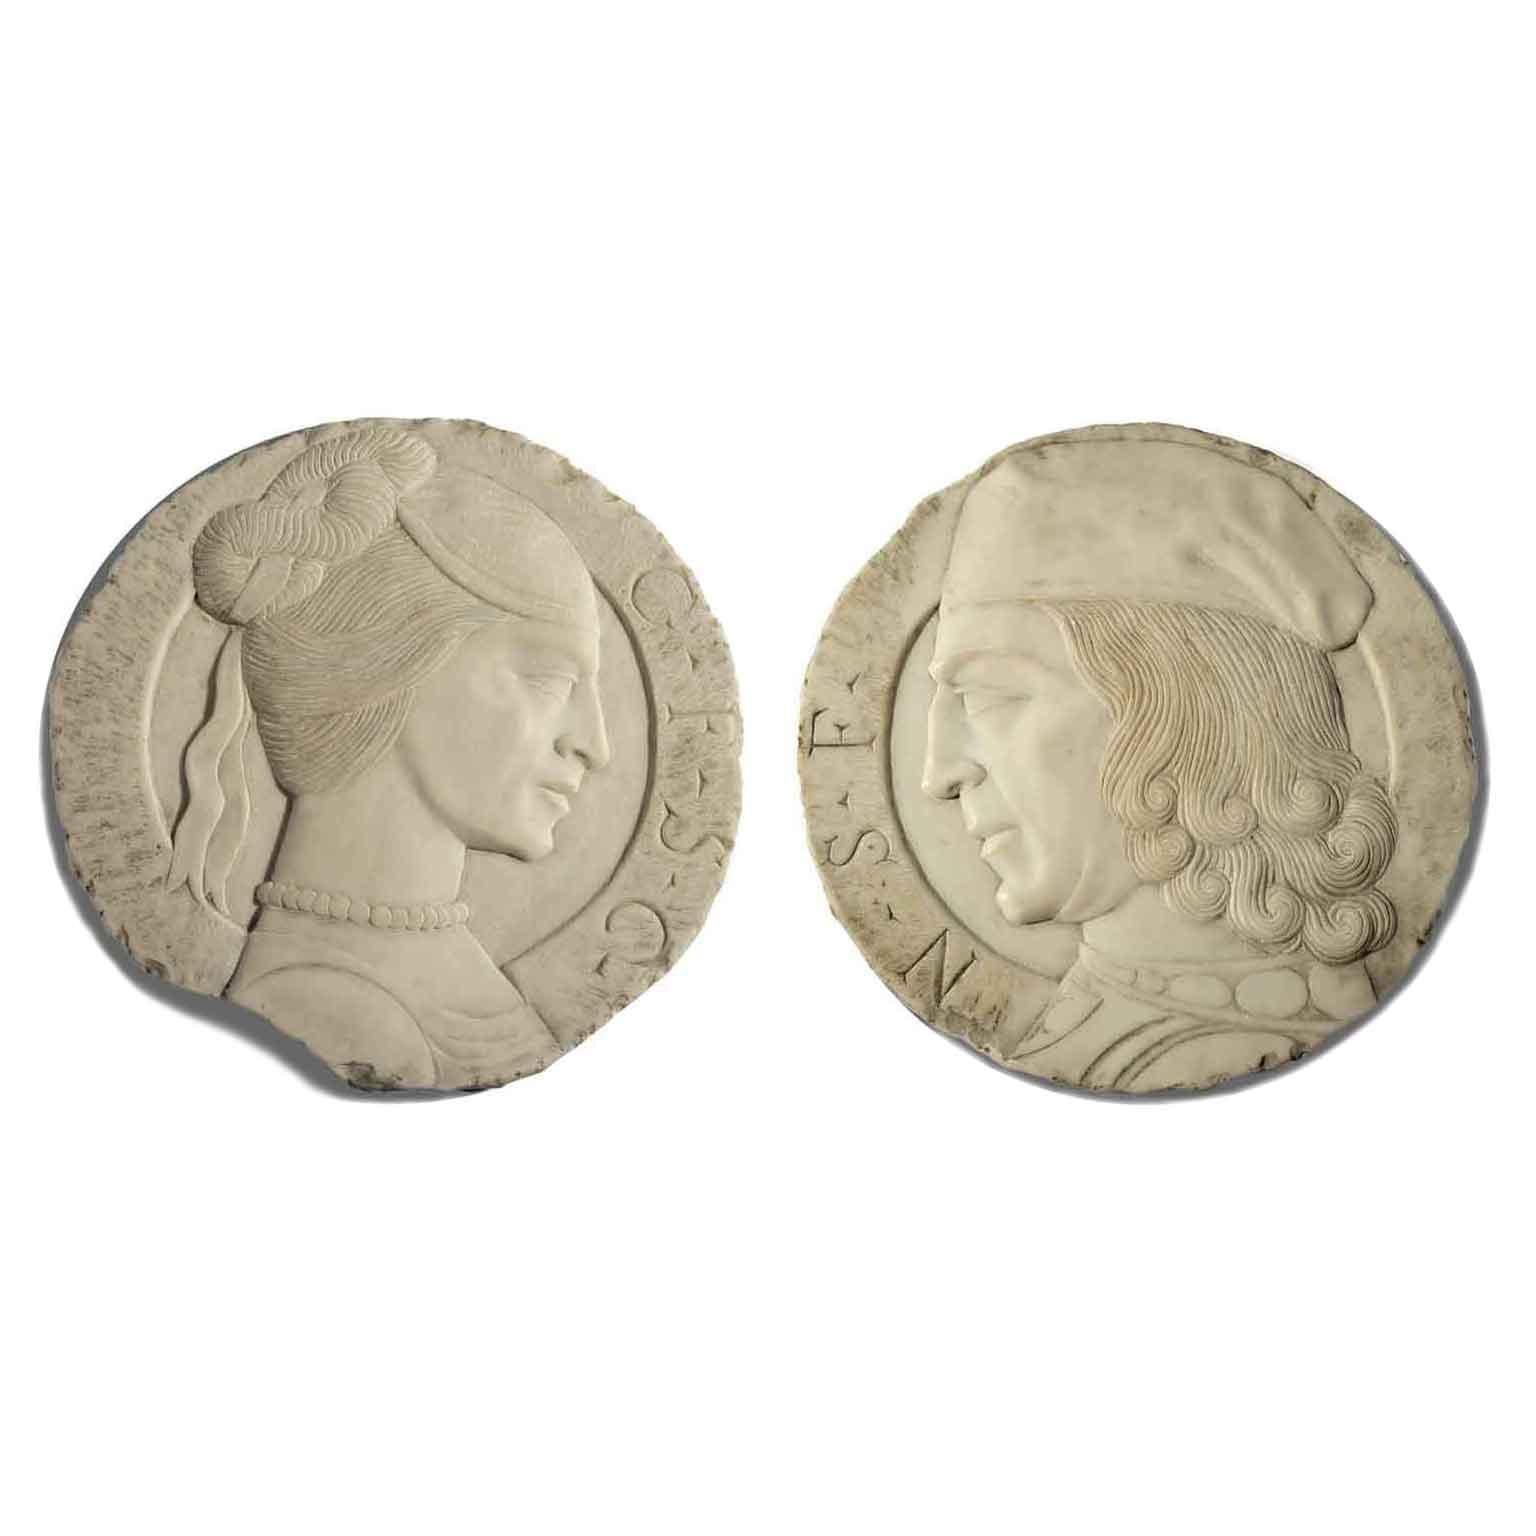 Pair of Italian Carrara marble relief plaques, a pair of Italian late 19th century marble profile portraits, depicting a Renaissance style man and a lady, a couple of court dignitaries, after the antique. The man with the hat and long curled hair is